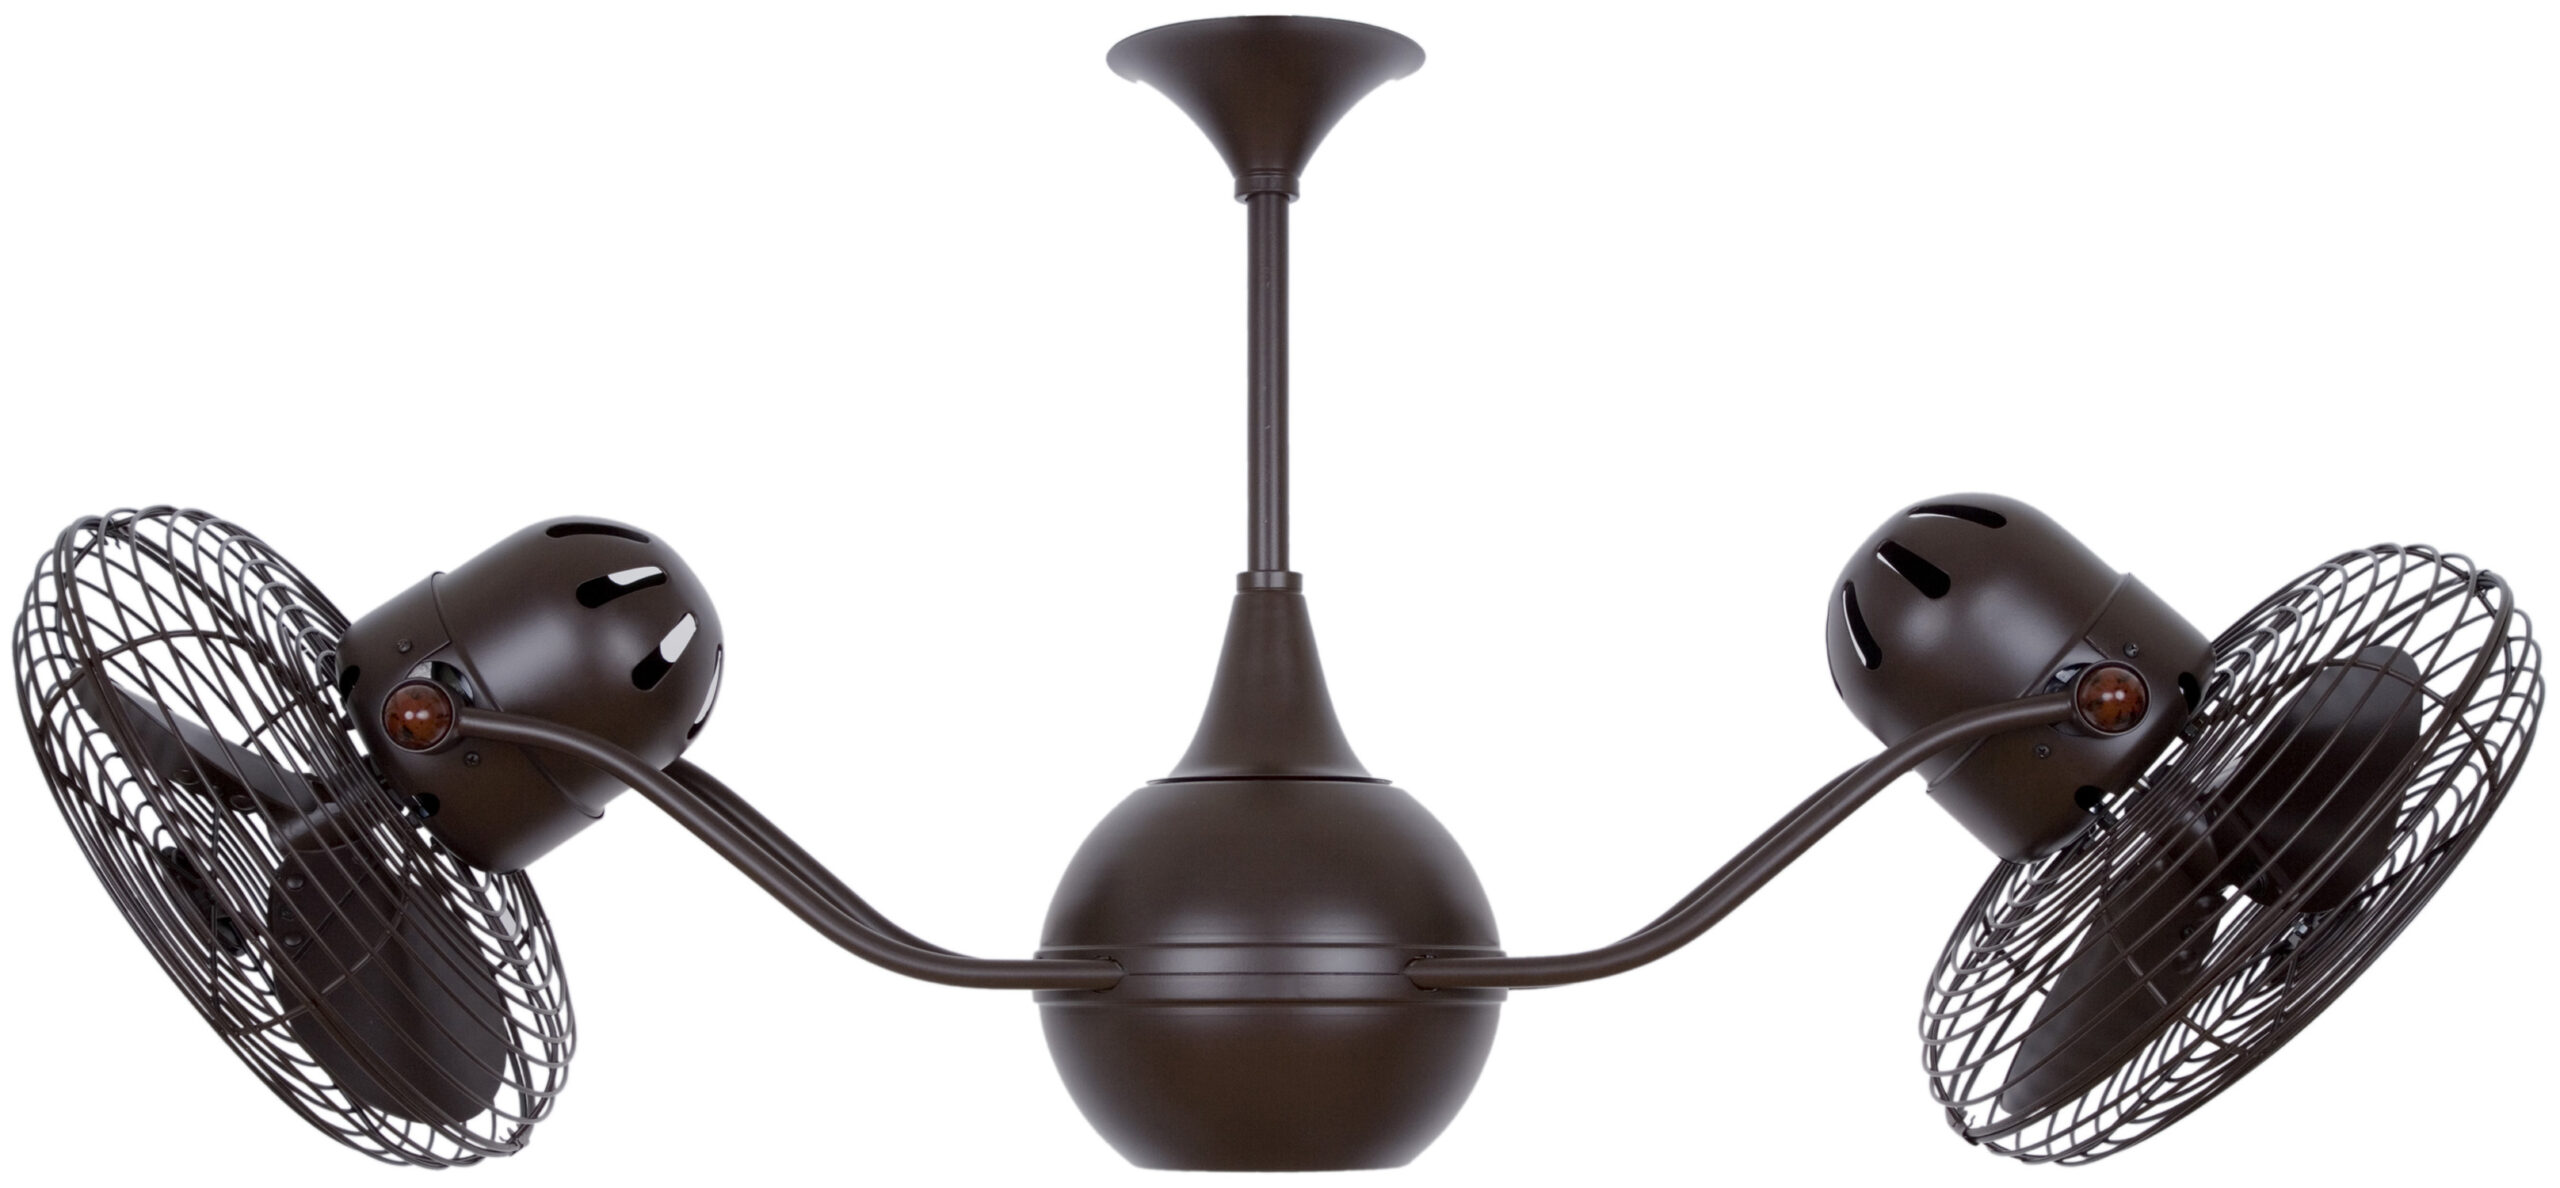 Vent-Bettina rotational dual head ceiling fan in Bronzette finis